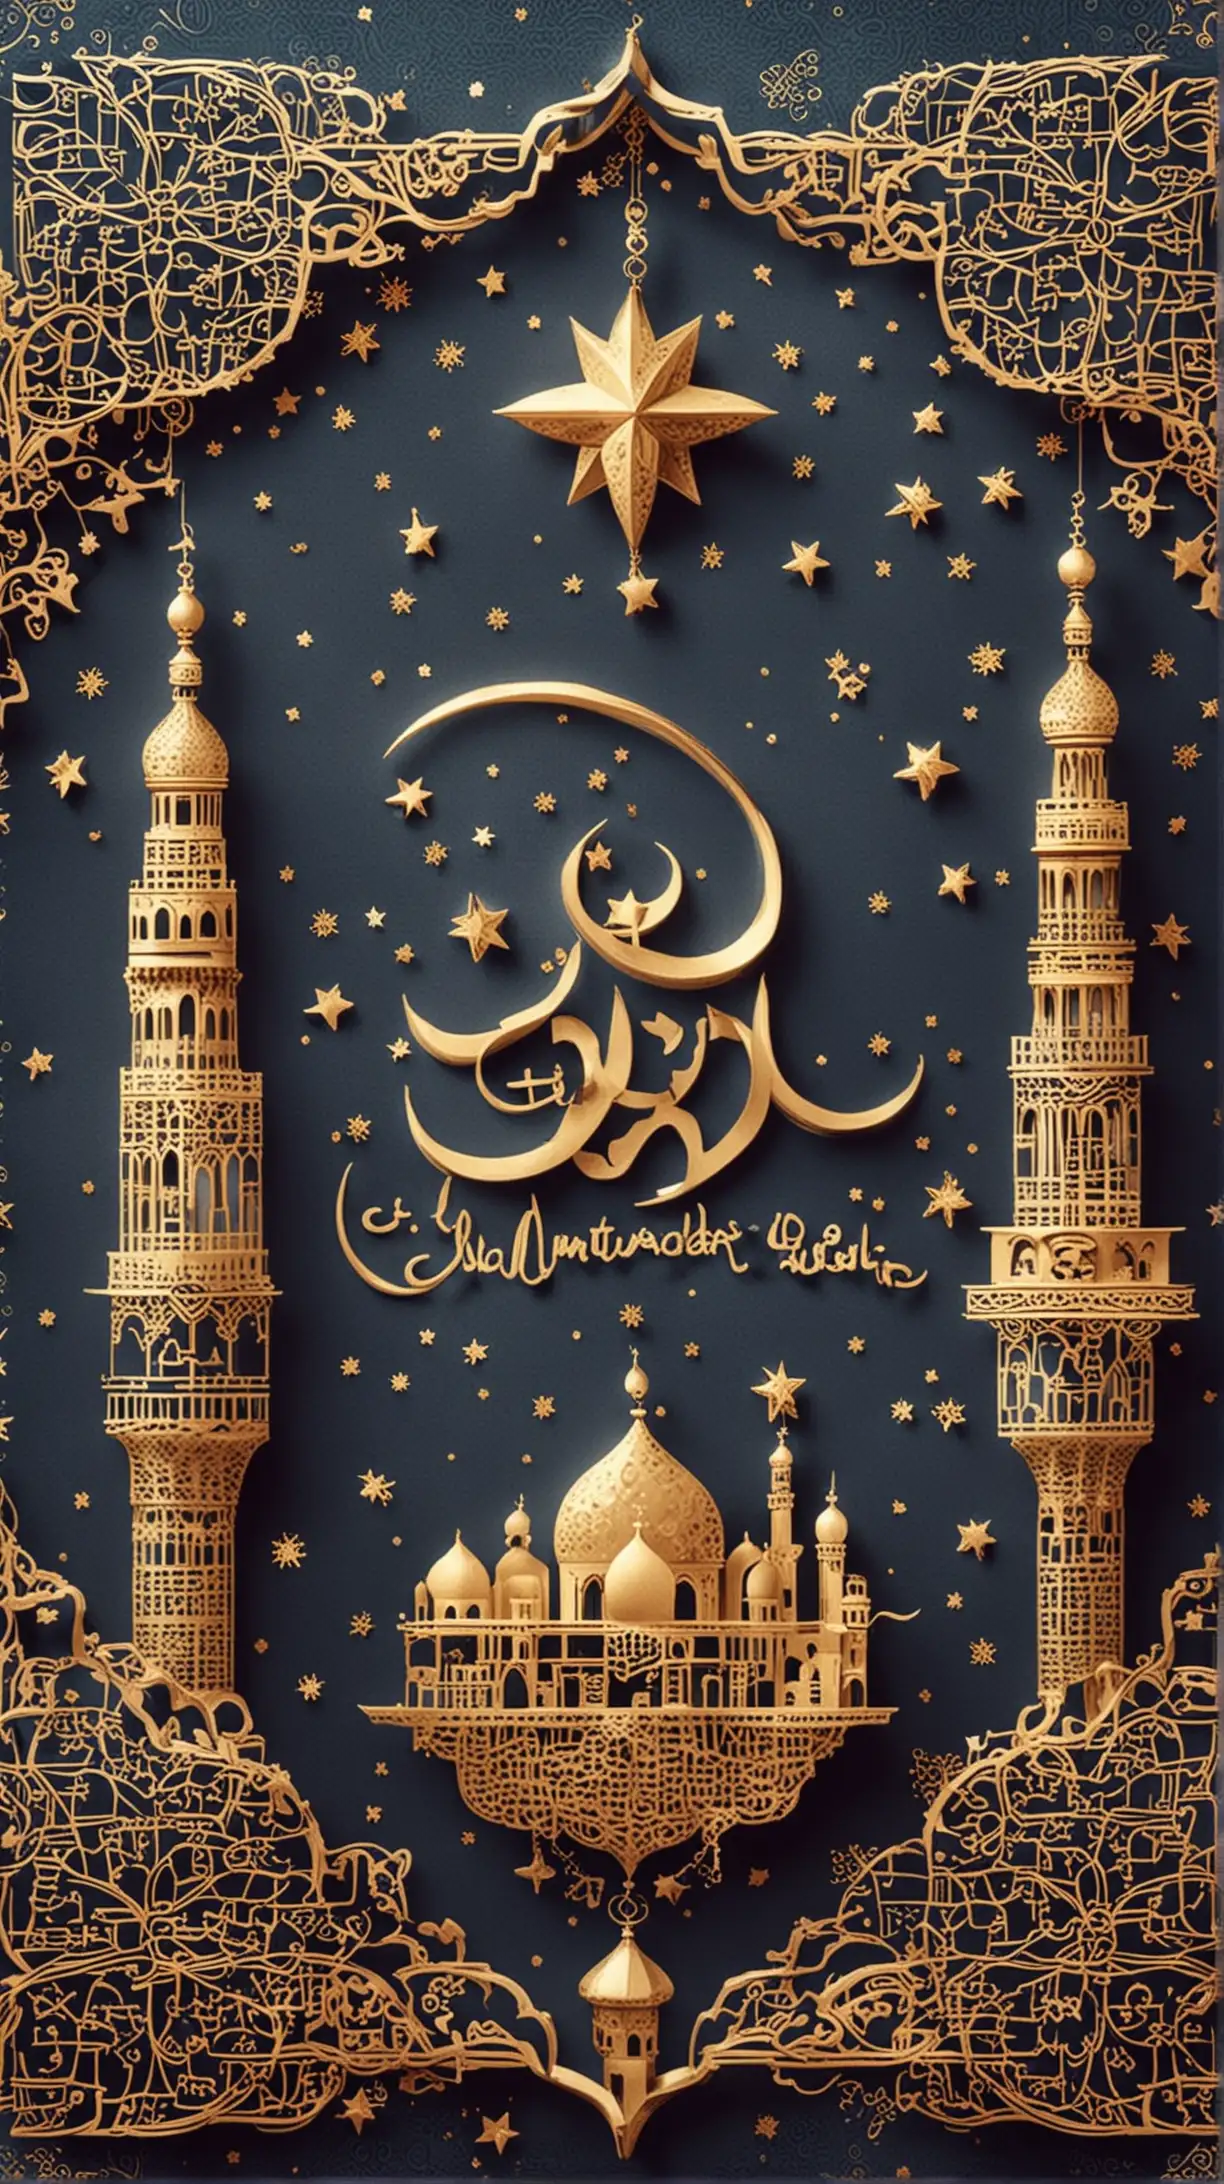 Eid Mubarak Greeting Card with Vibrant Islamic Patterns and Crescent Moon Design